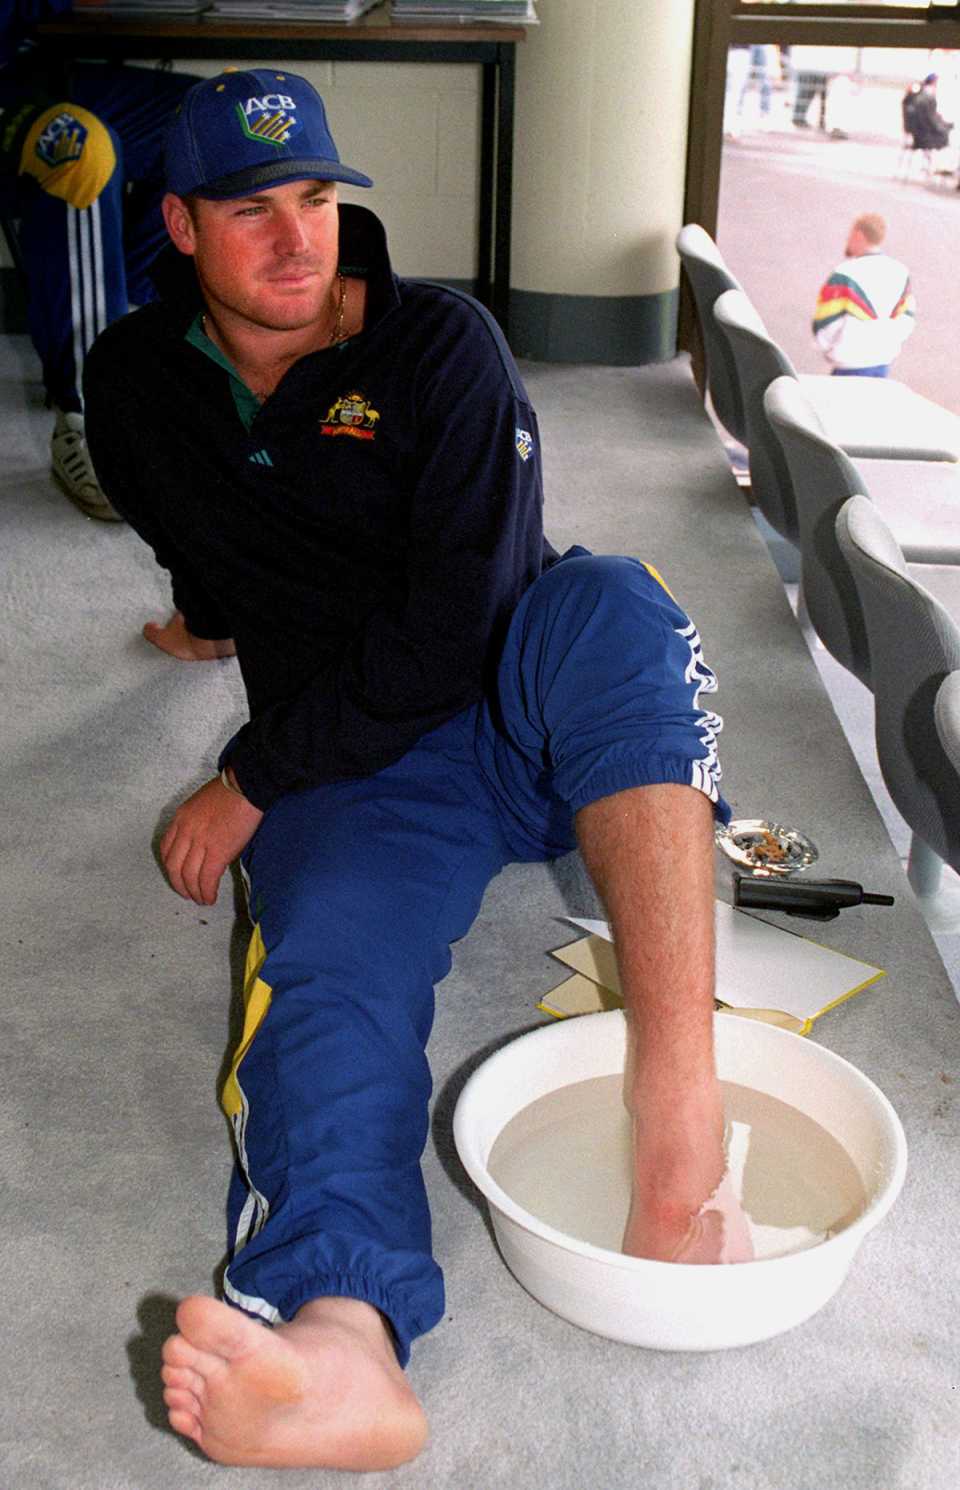 Shane Warne soaks his foot in a tub of water after receiving a cracked toe while batting, Australia v Pakistan, 2nd Test, Hobart, 2nd day, November 18, 1995